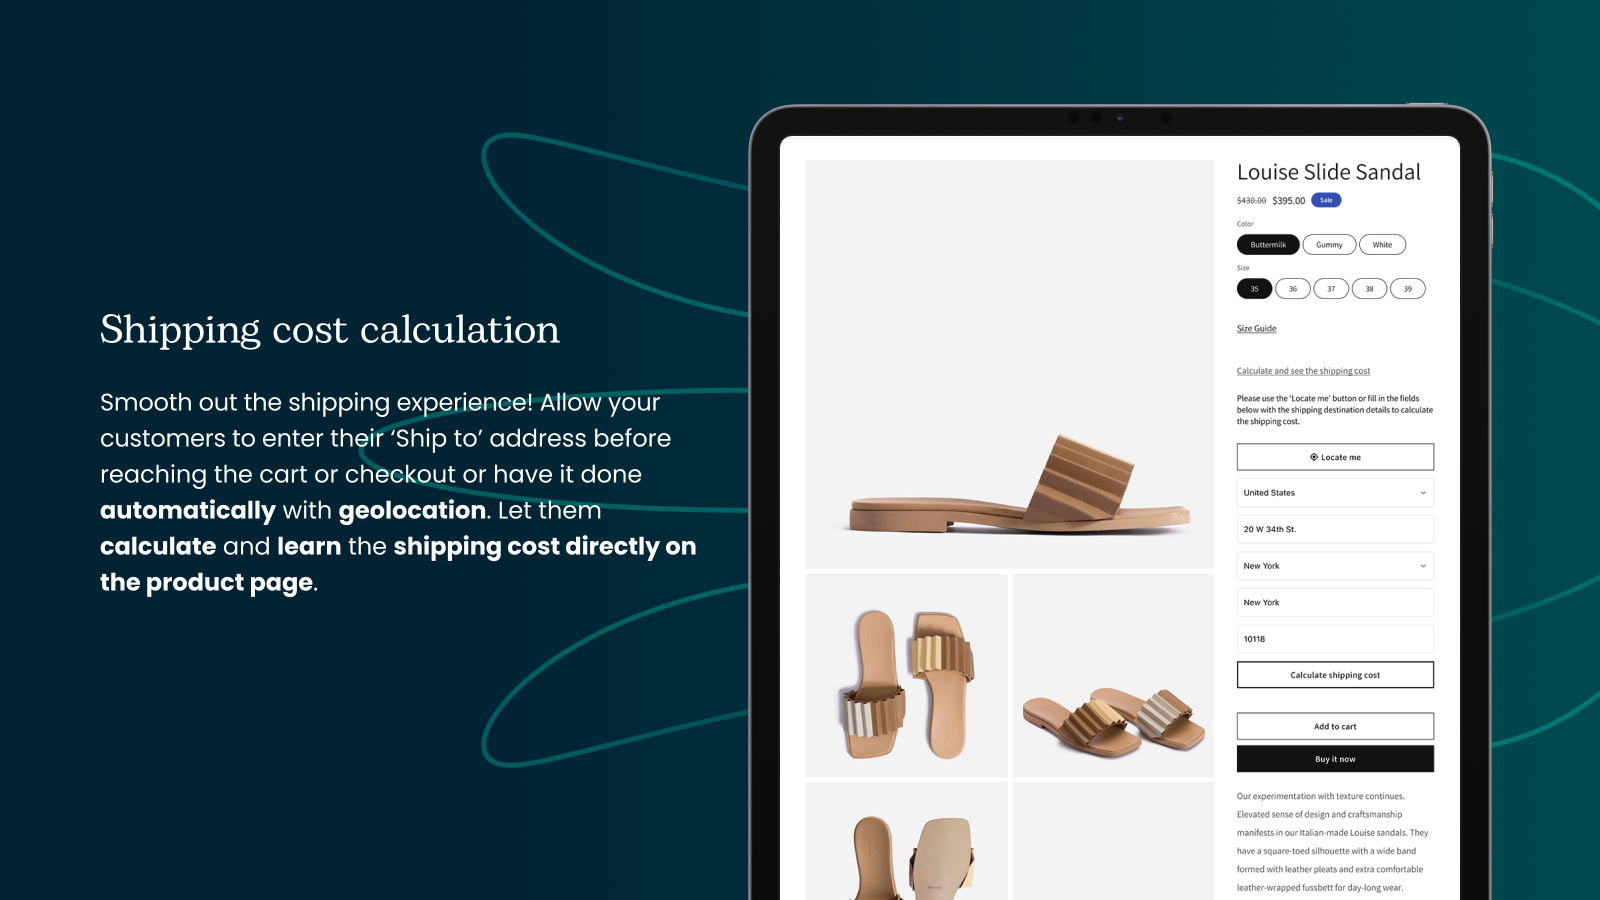 Shipping cost calculation directly on store's product pages